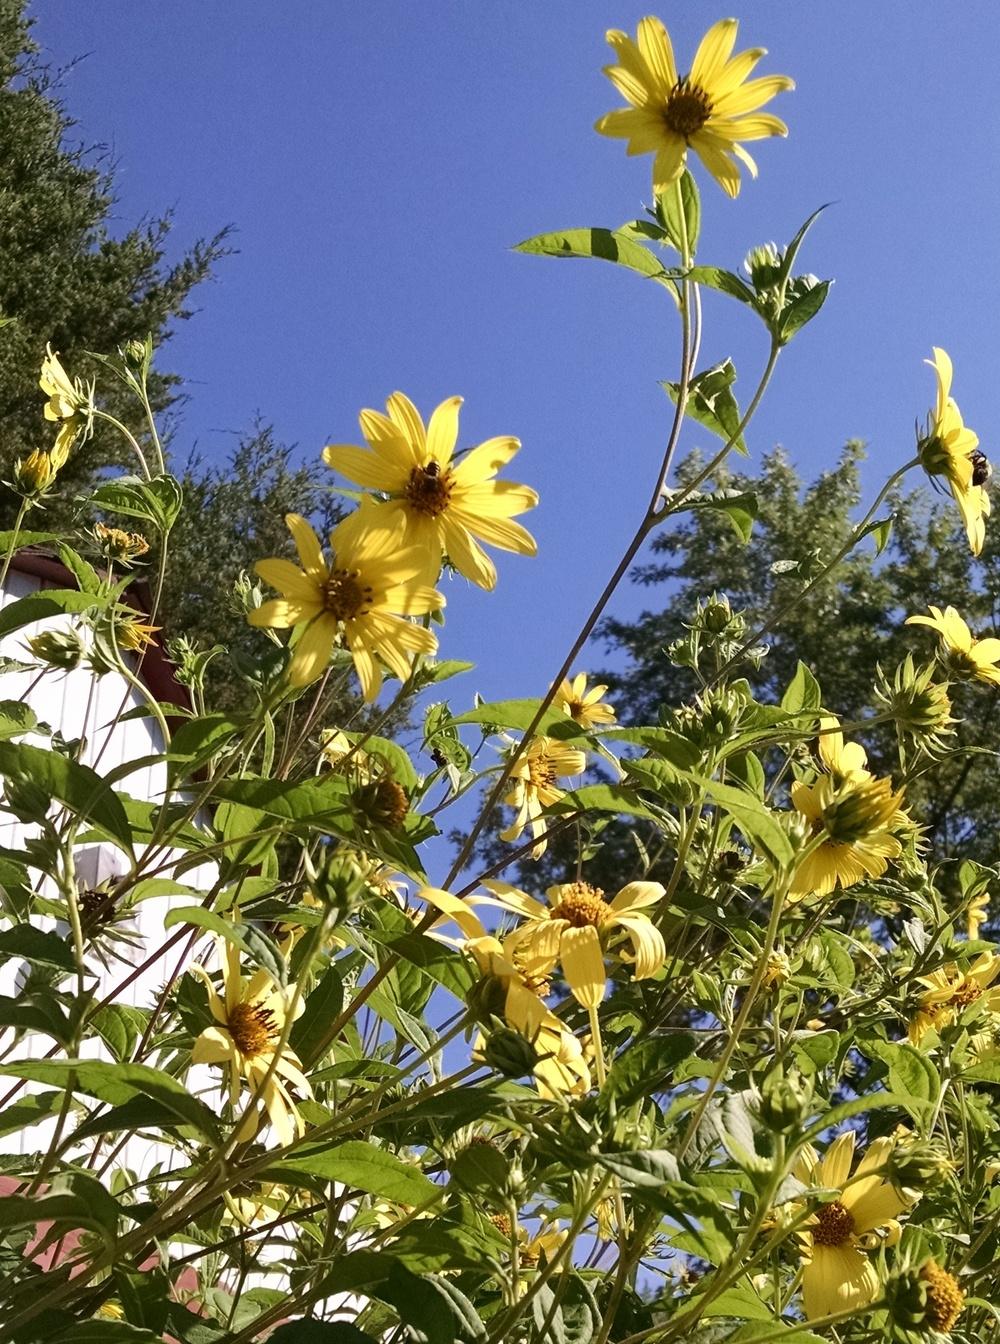 Photo of Small Wood Sunflower (Helianthus microcephalus 'Lemon Queen') uploaded by Catmint20906